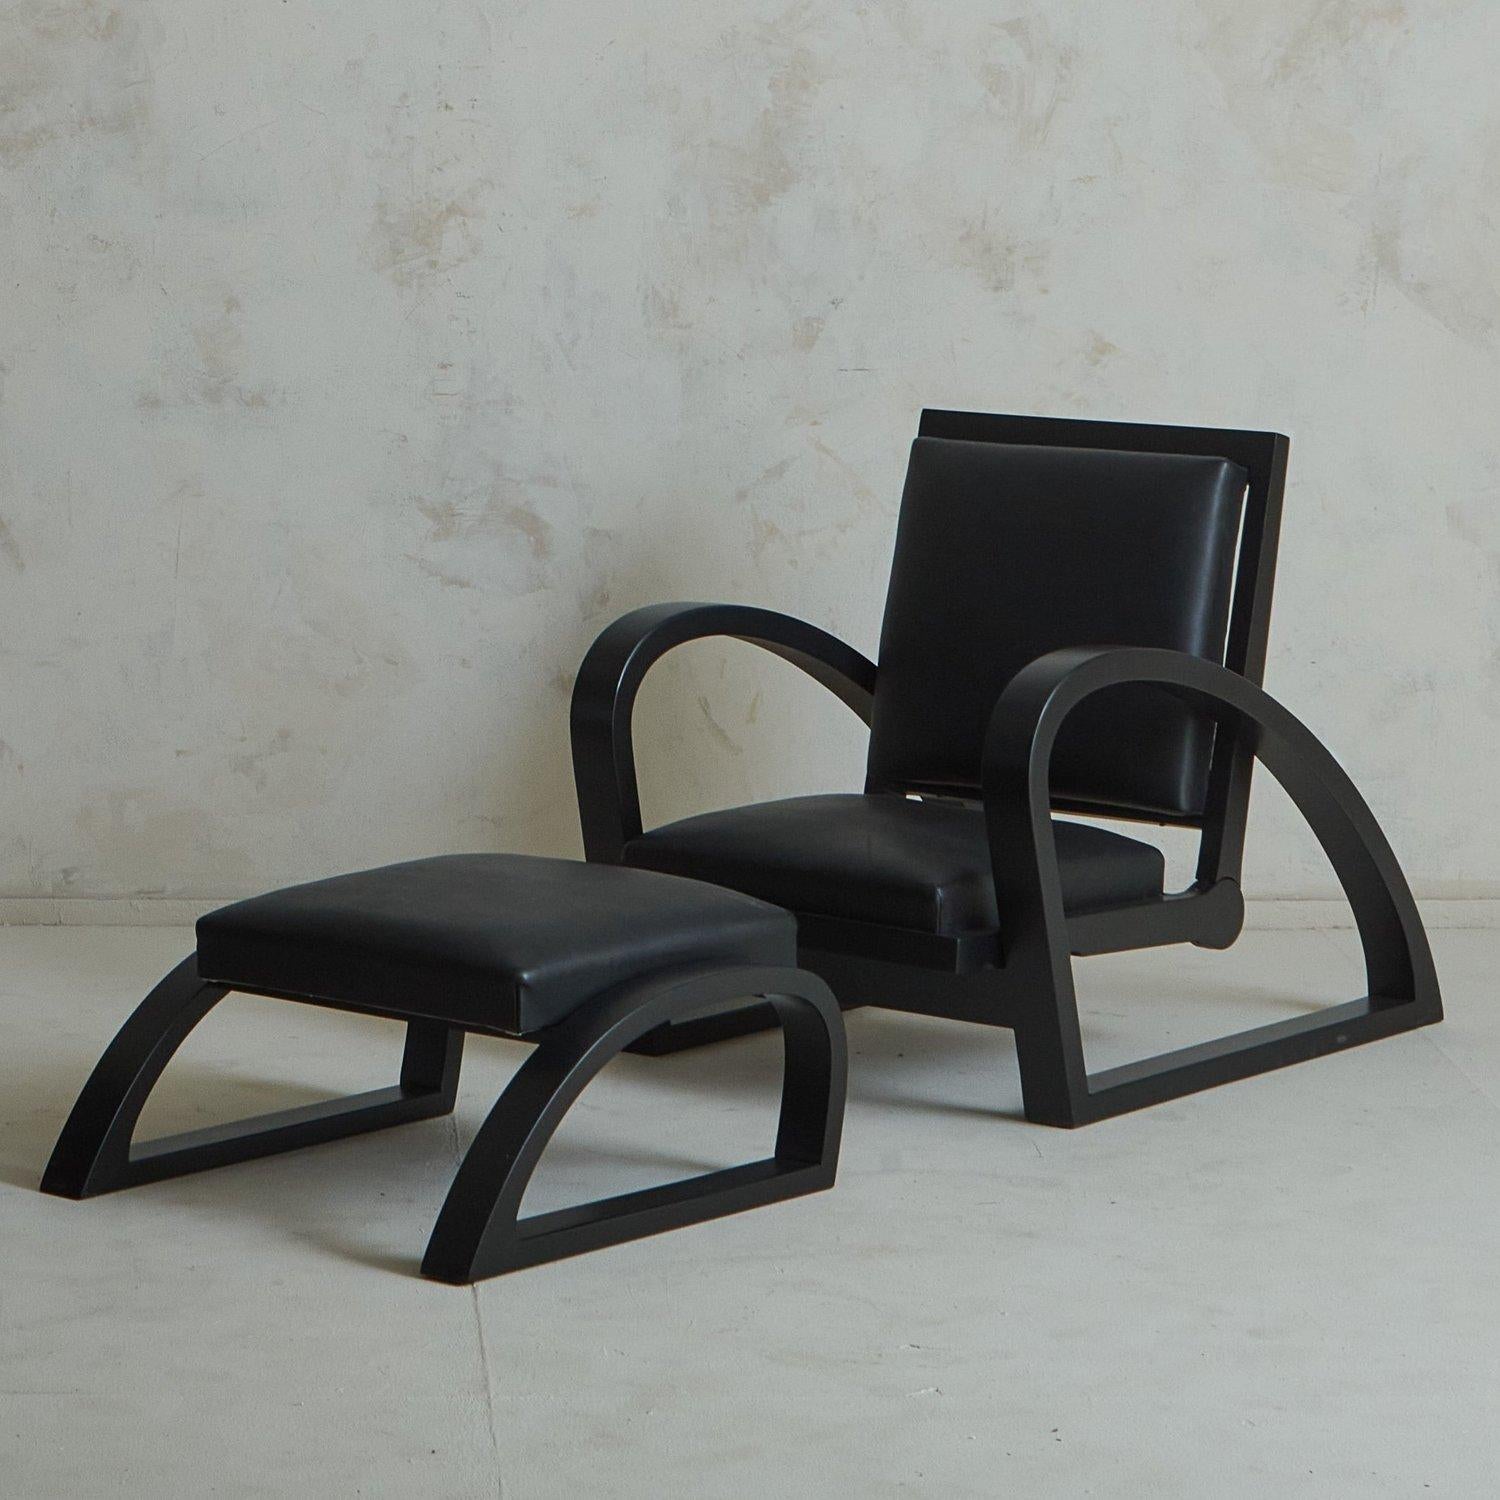 A 1940s French lounge chair attributed to Francis Jourdain. This sculptural lounge chair features a black wood frame with dramatic curves, which reclines to various positions. It has an upholstered seat and back in original black leather. A matching